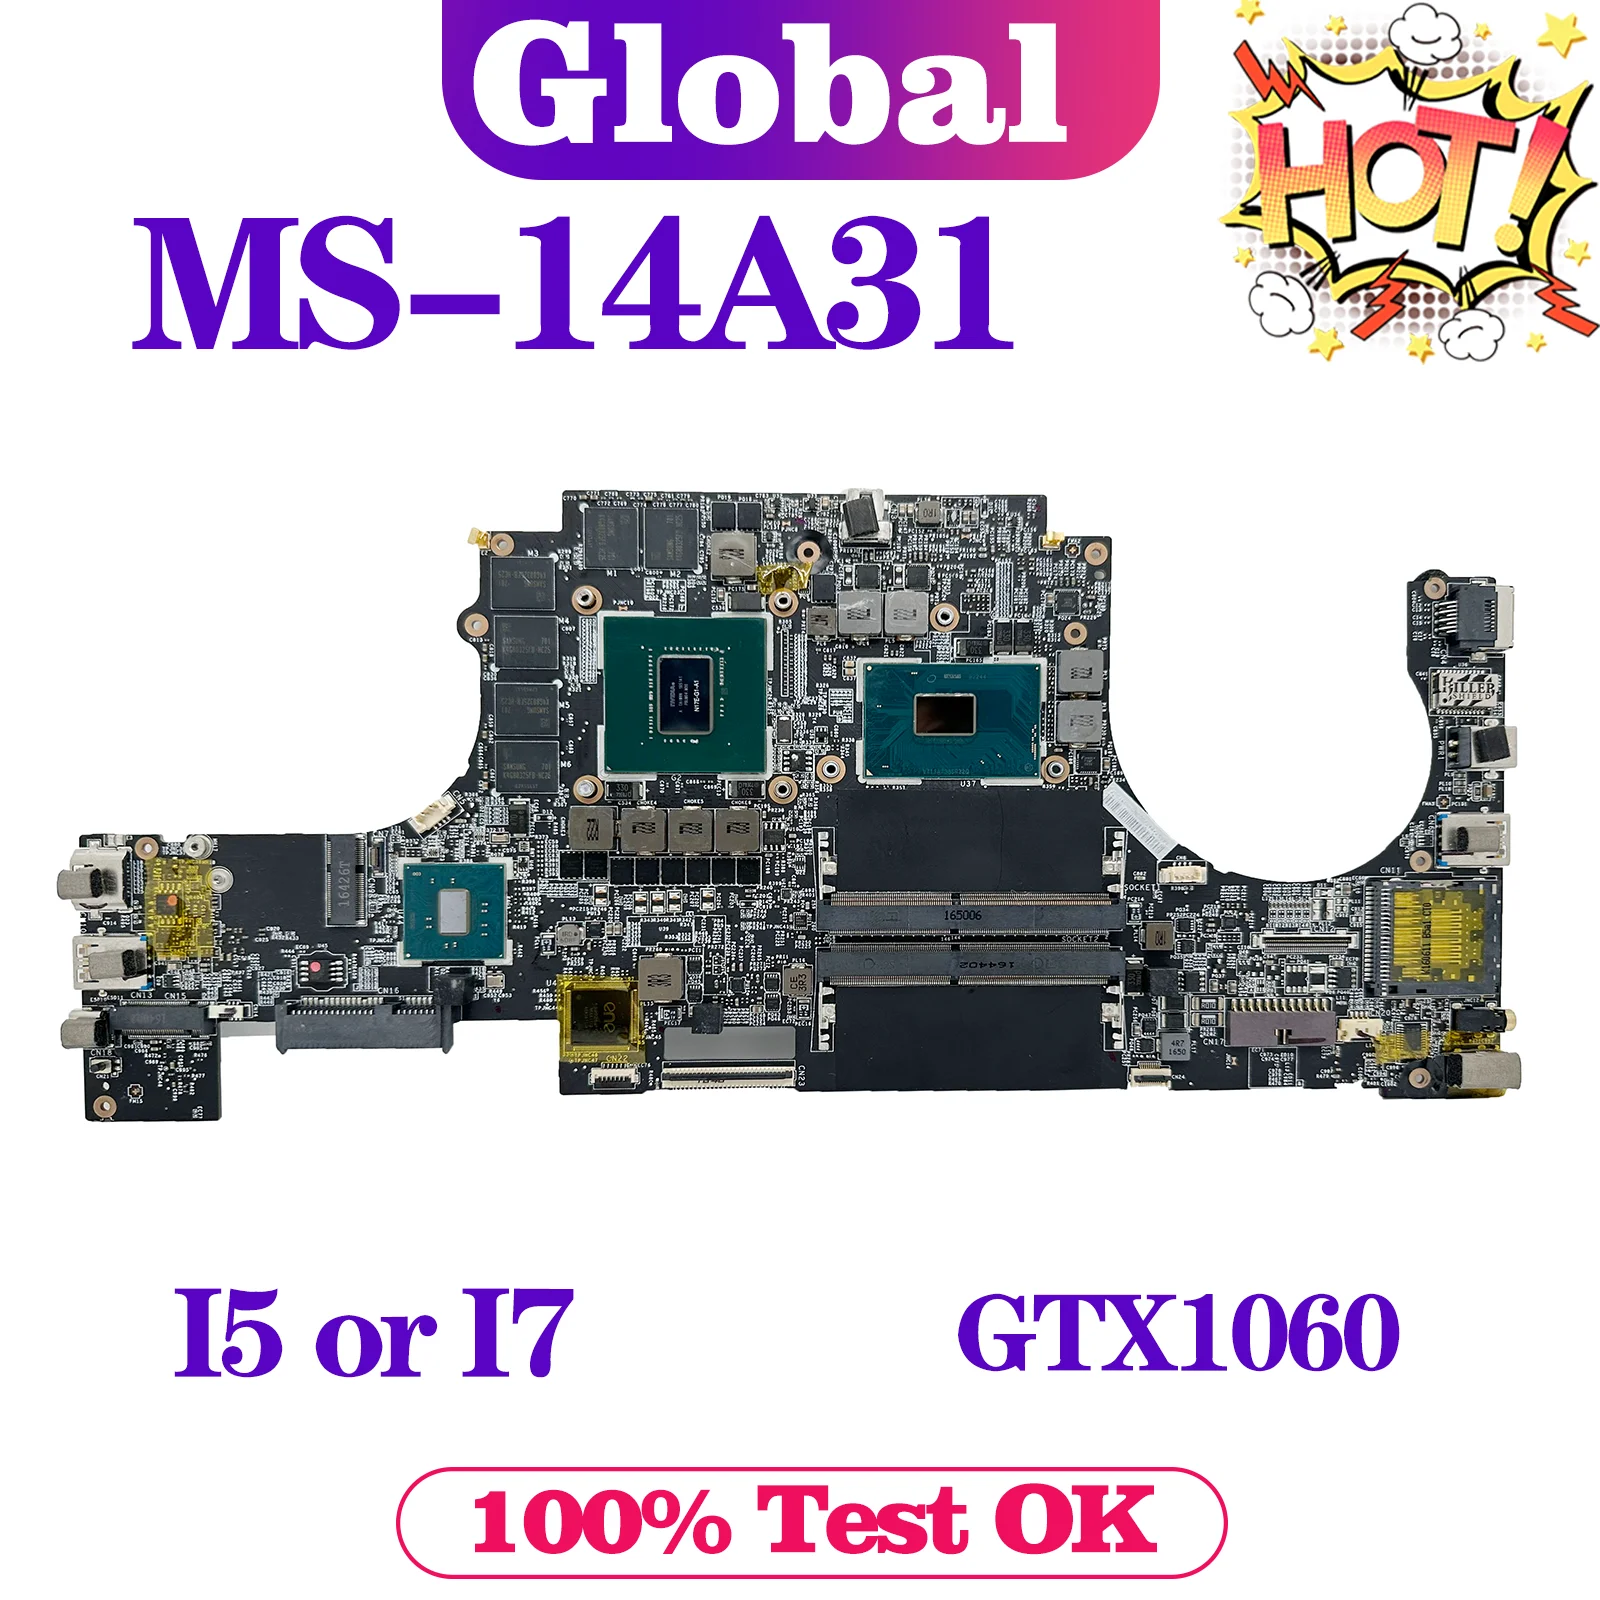 

KEFU Mainboard For MSI MS-14A3 GS43 GS43VR MS-14A31 Laptop Motherboard I5 I7 7th Gen GTX1060